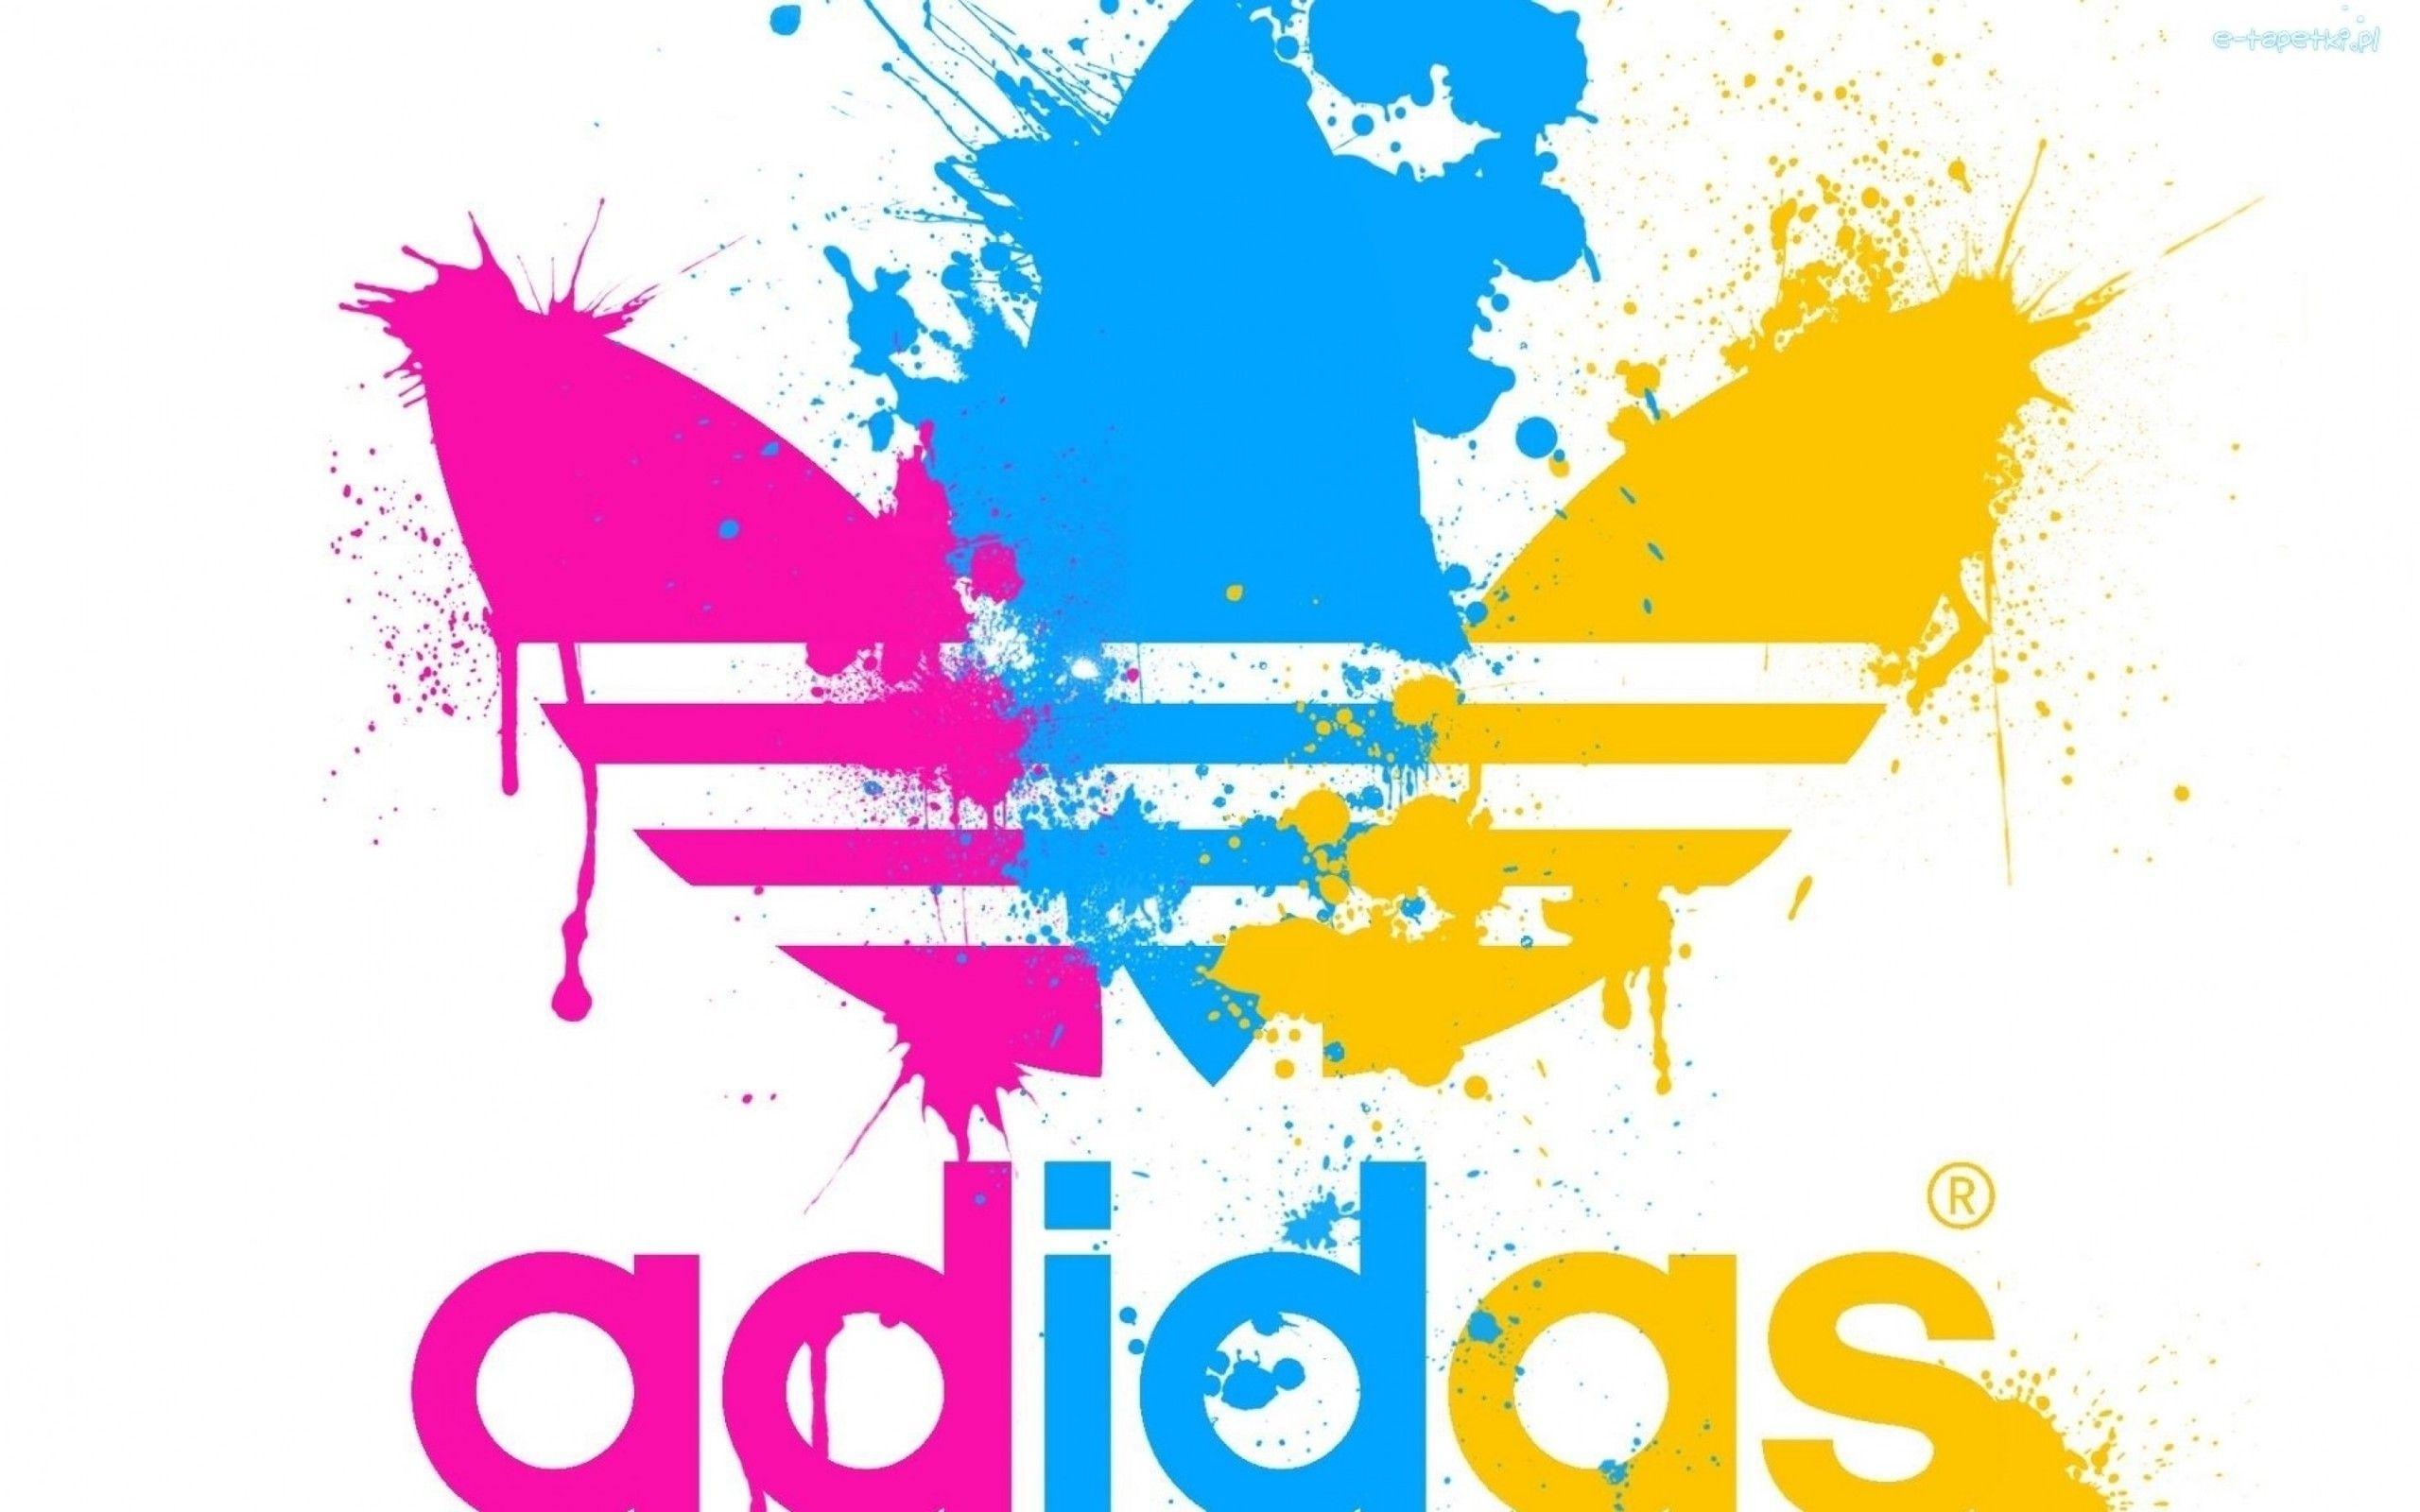 Colorful Adidas Logo - Pictures of Colorful Adidas Wallpaper - kidskunst.info